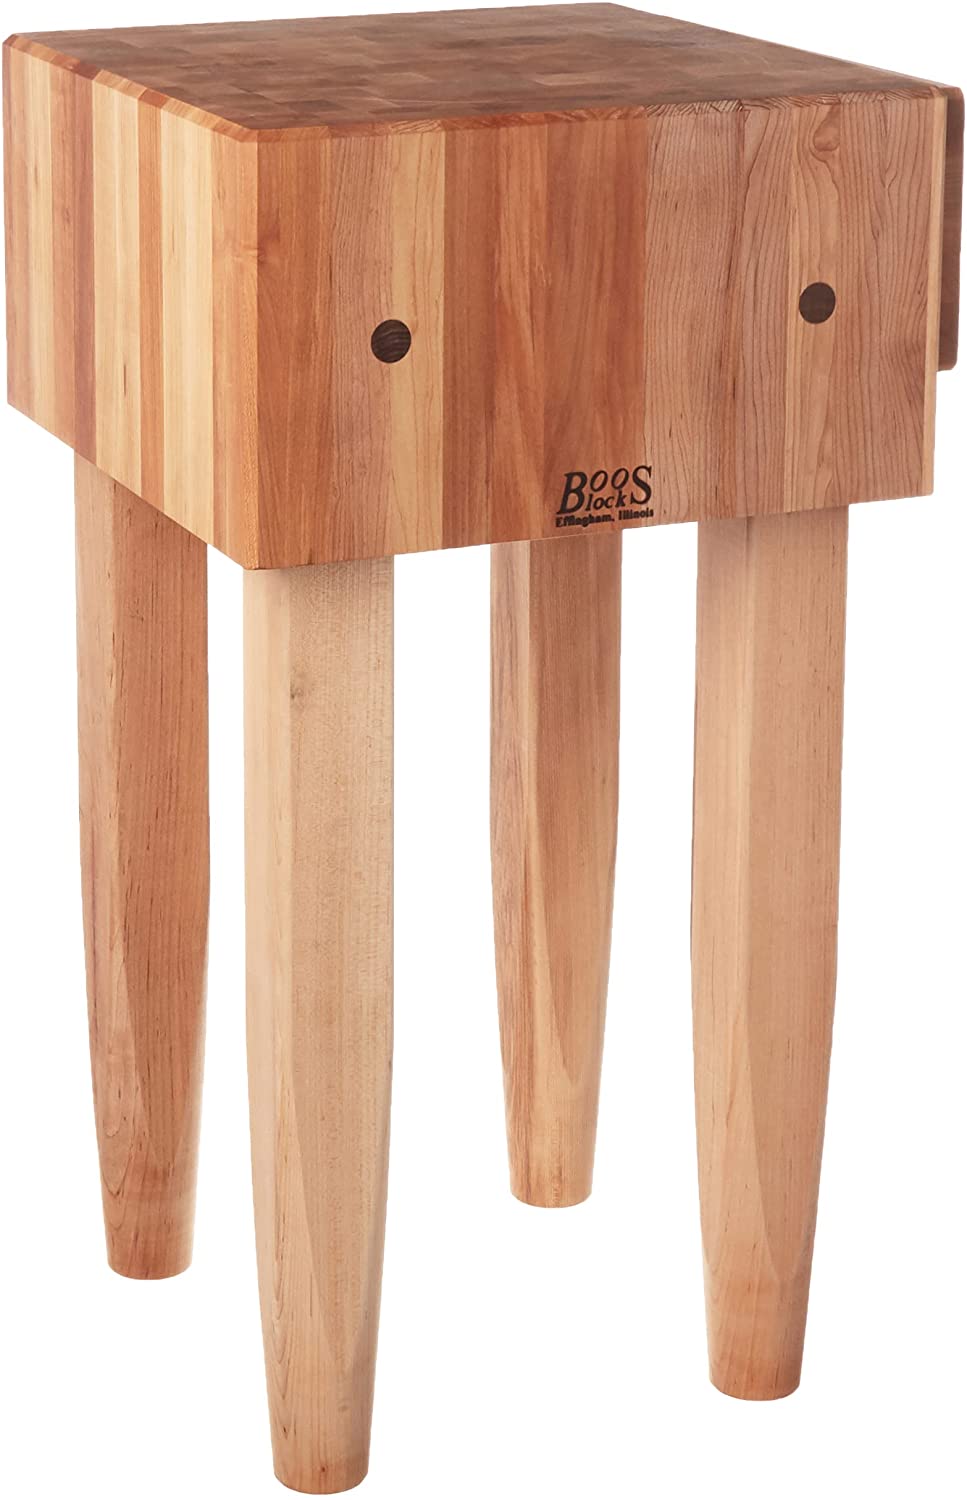 John Boos PCA1 Maple Wood End Grain Solid Butcher Block with Side Knife Slot